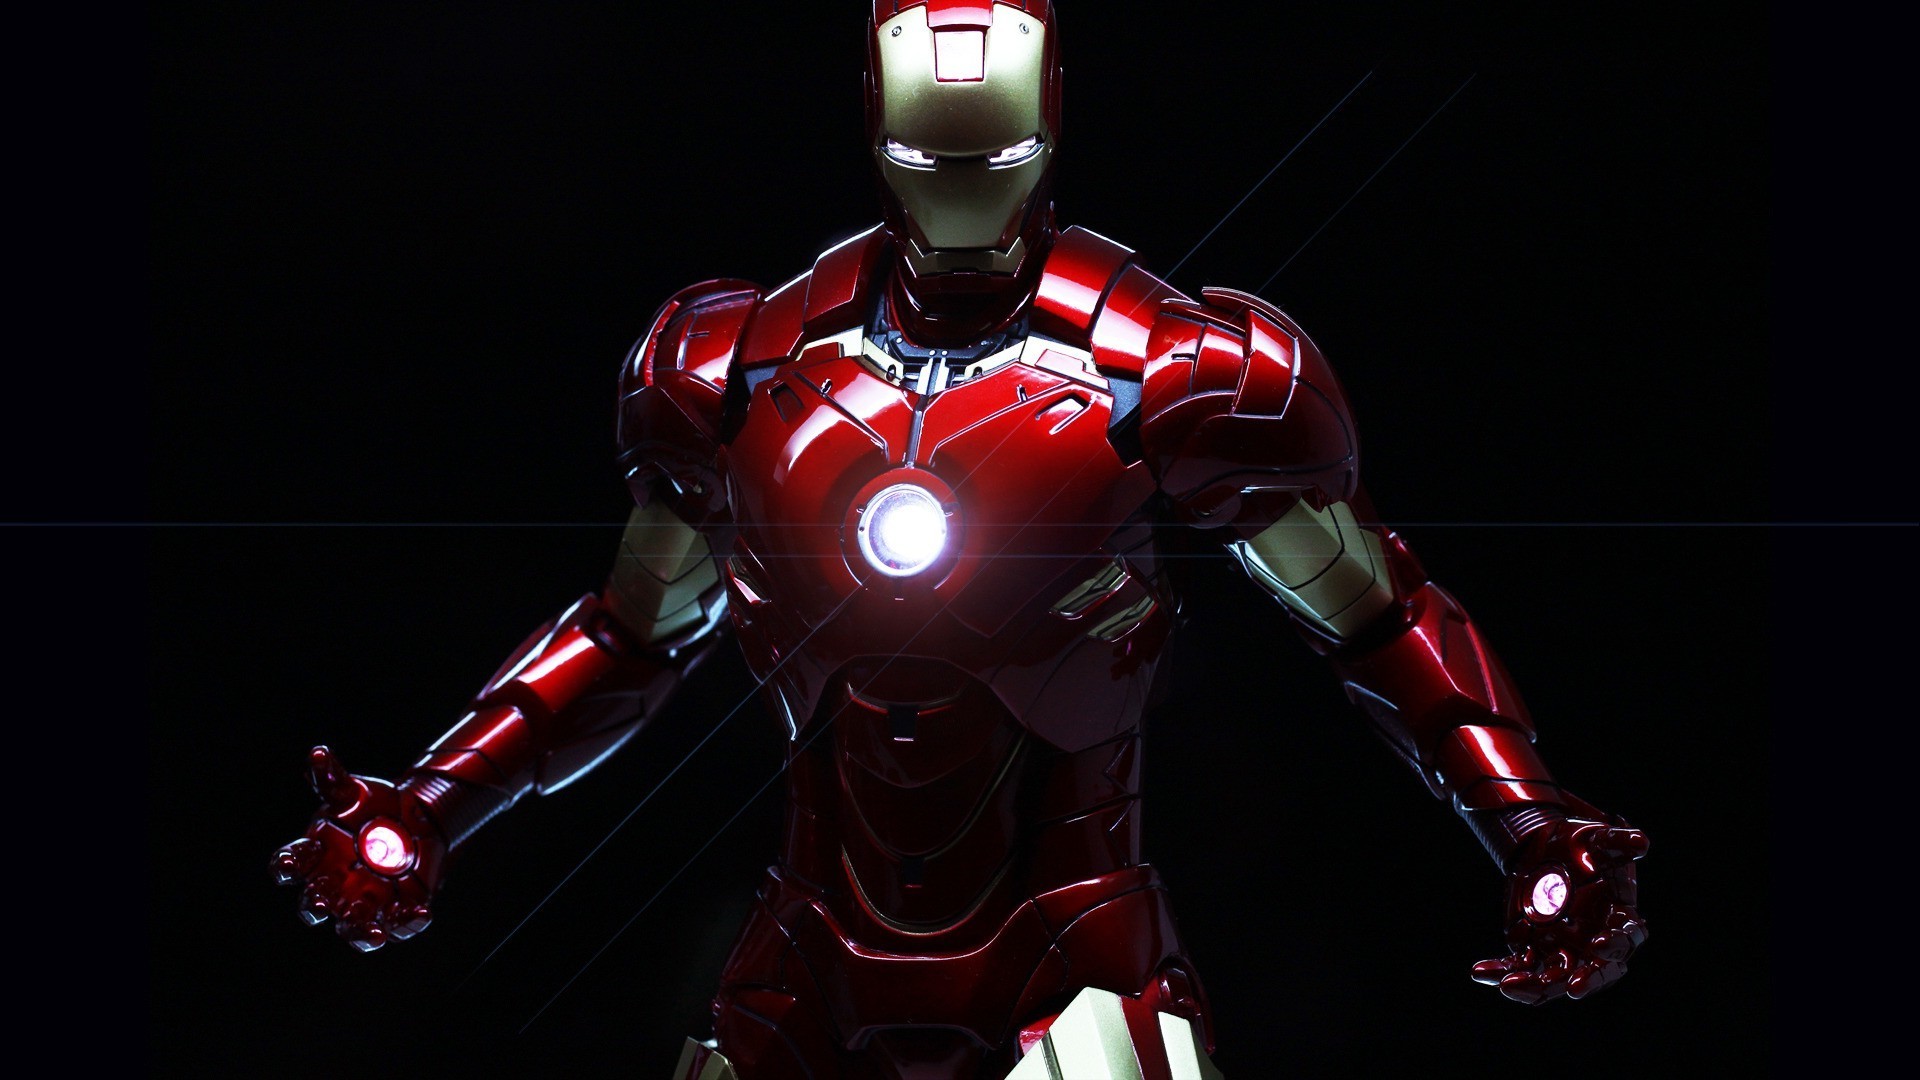 35 Iron Man HD Wallpapers for Desktop   Page 3 of 3   Cartoon District 1920x1080